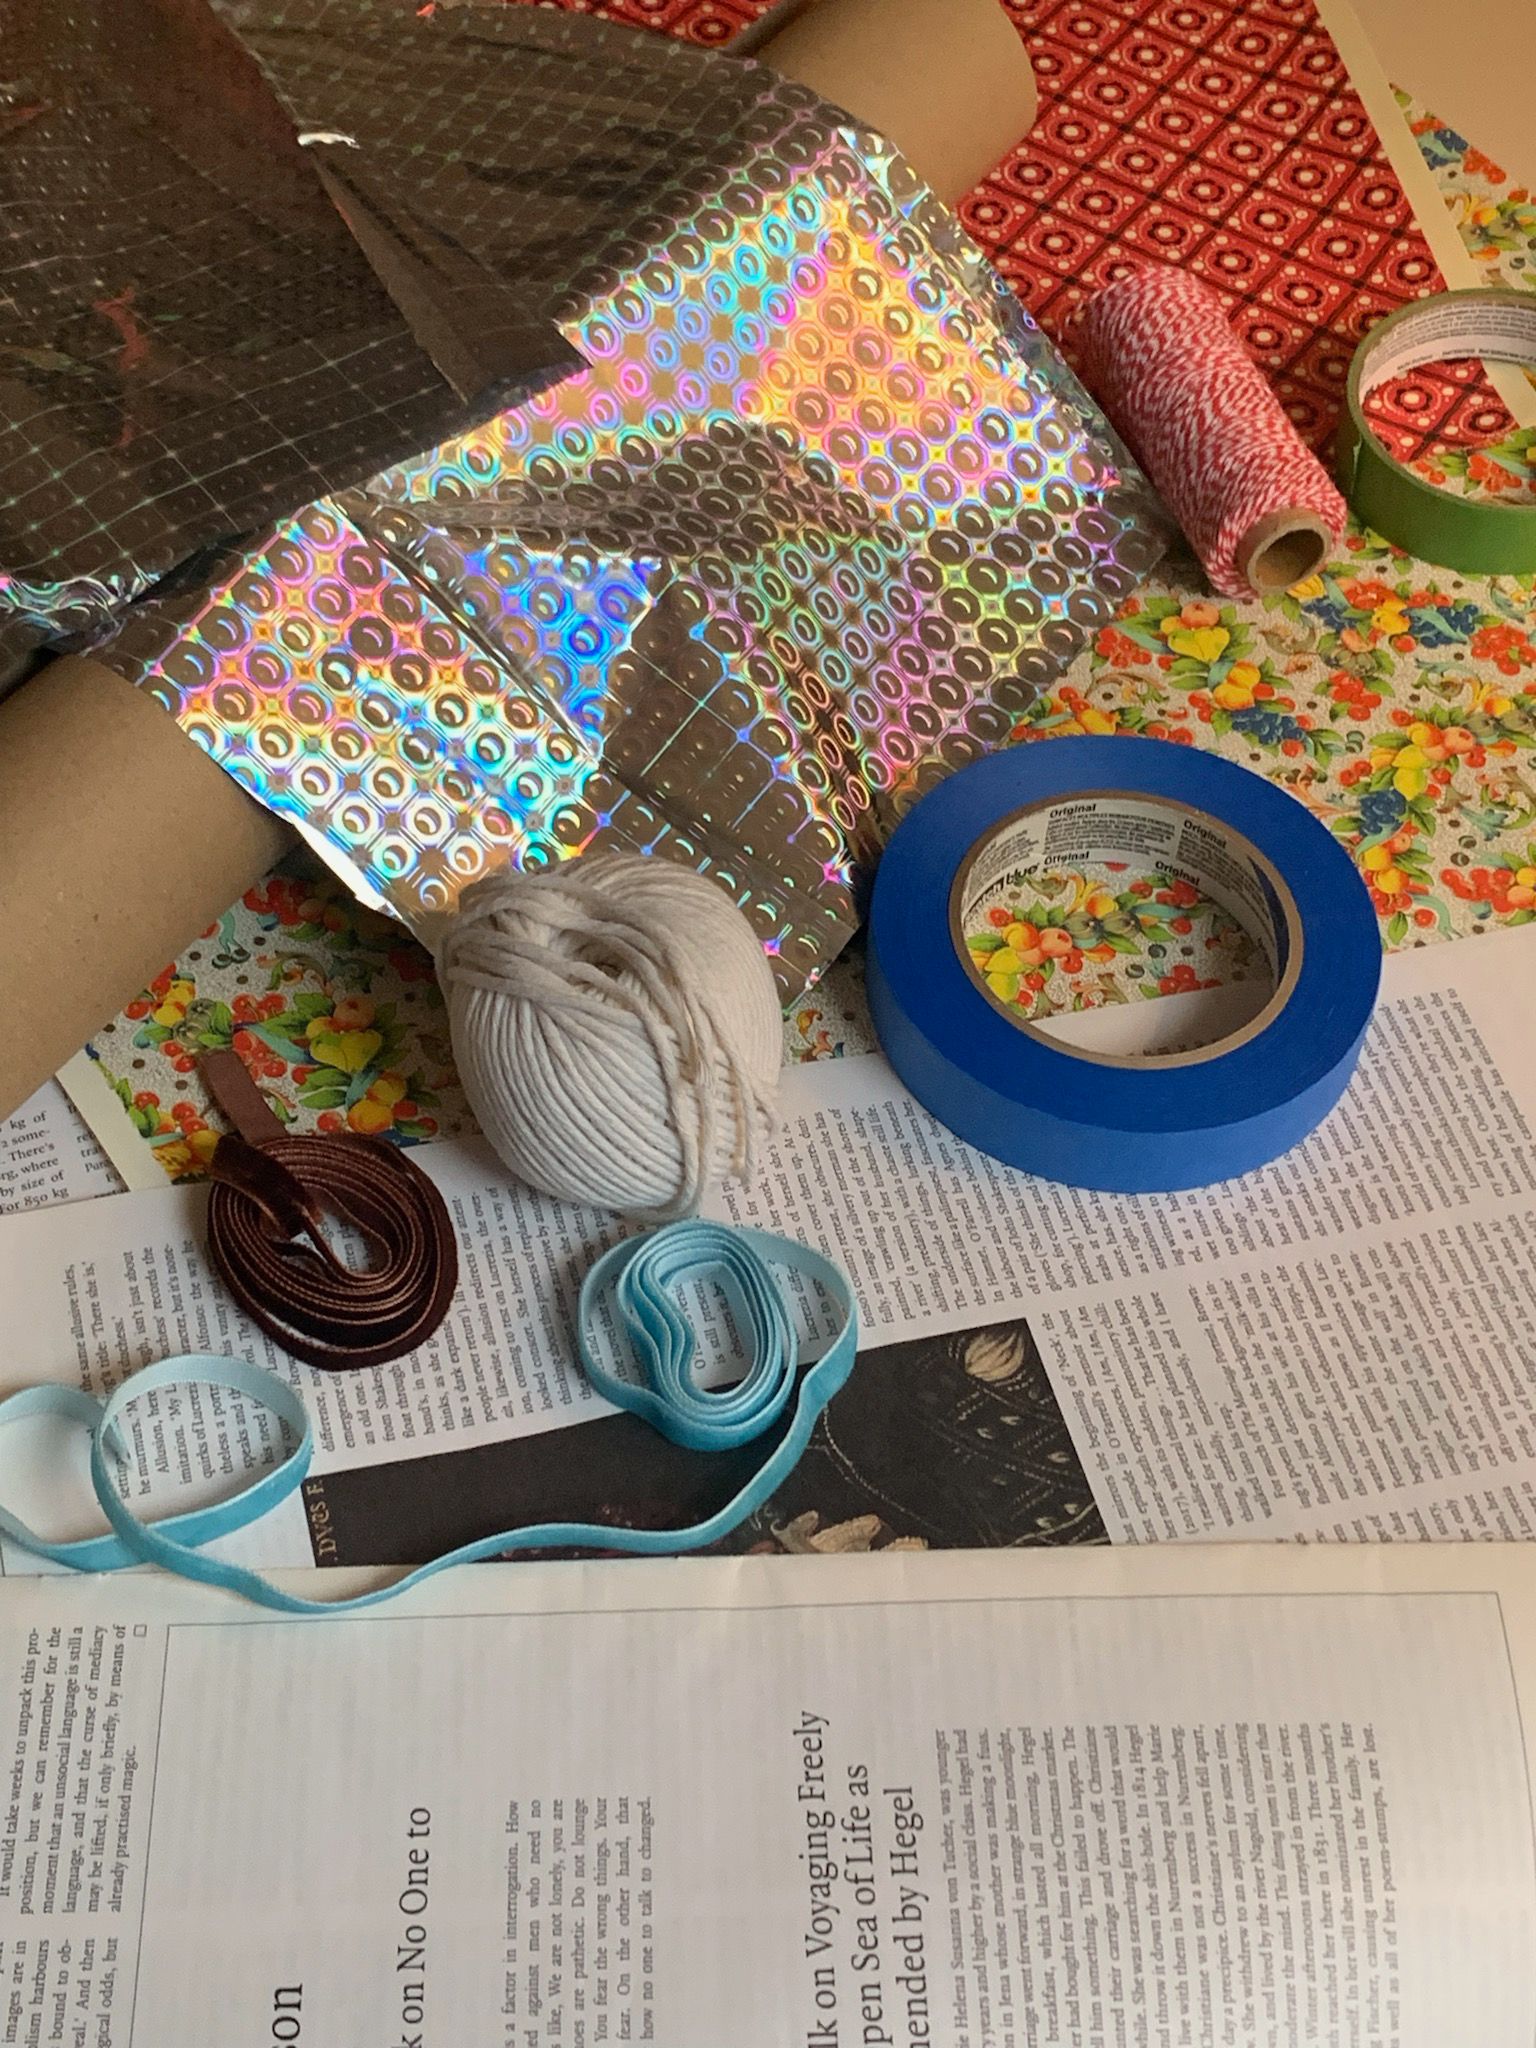 https://pyxis.nymag.com/v1/imgs/d56/de4/3324b3f55a3c99b217b118371422e2bd59-wrapping-paper-4.jpg